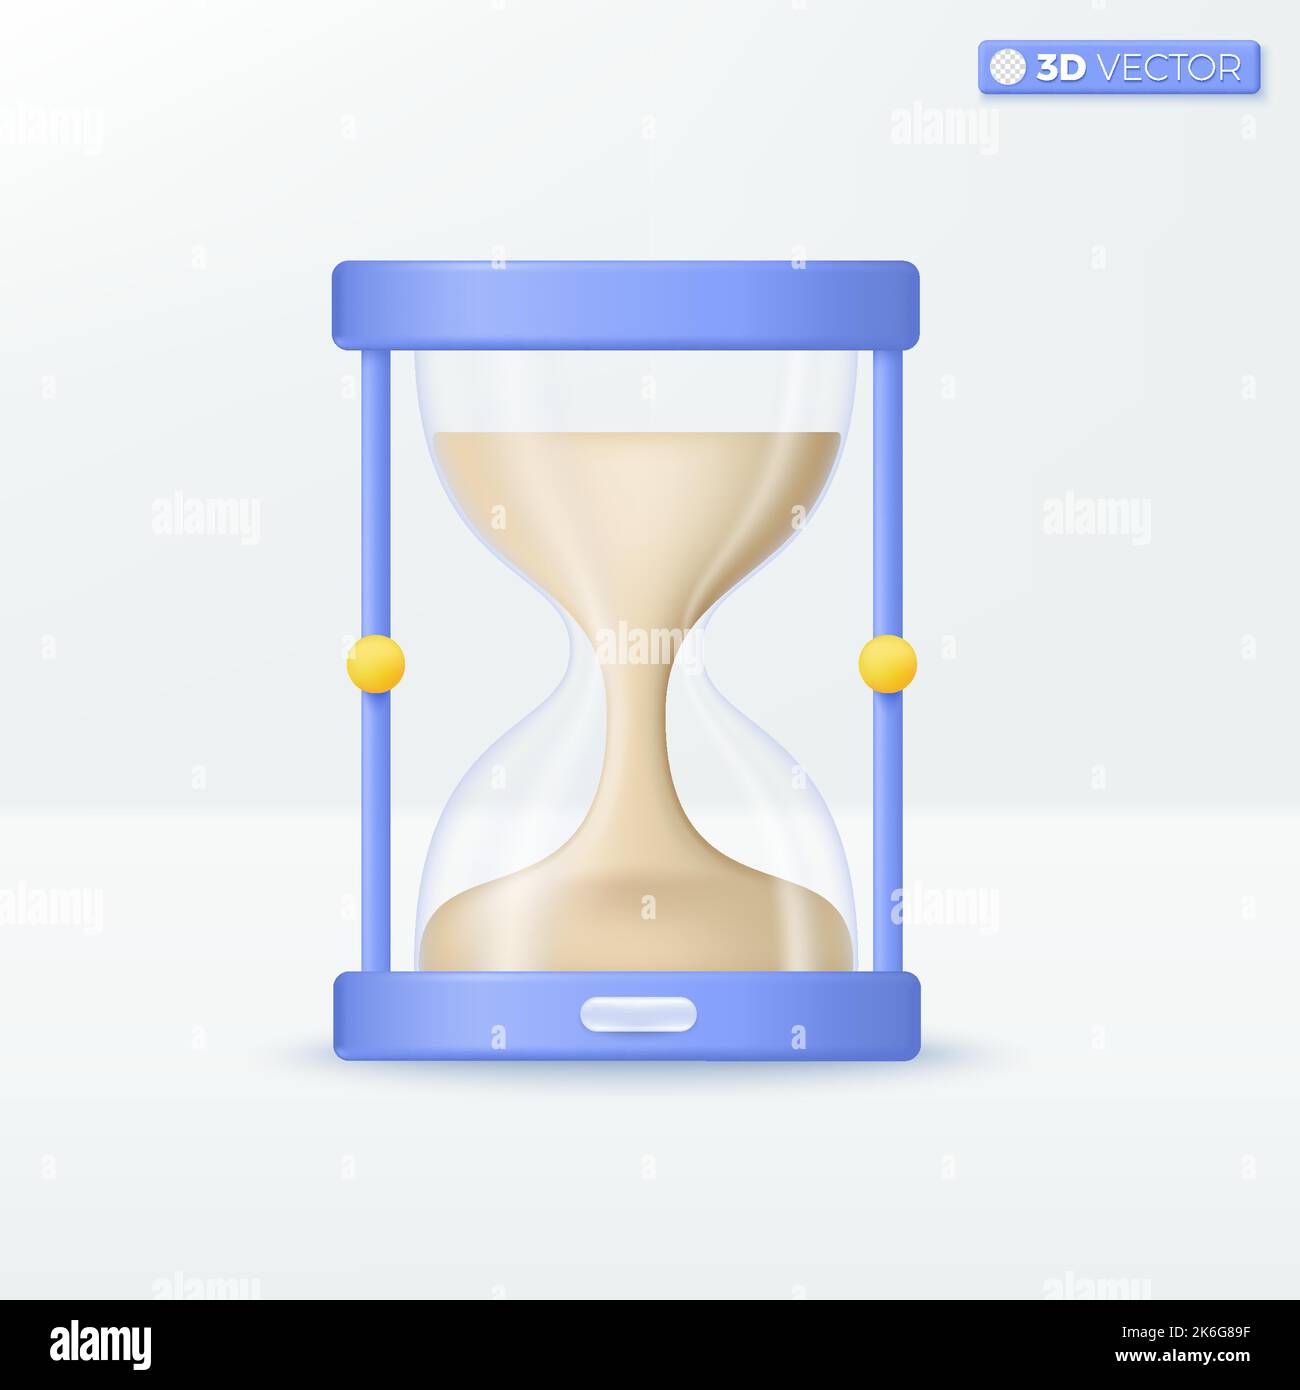 Hourglass With Sand Icon Symbols Business Hours Countdown Time And Deadline Concept 3d 3991